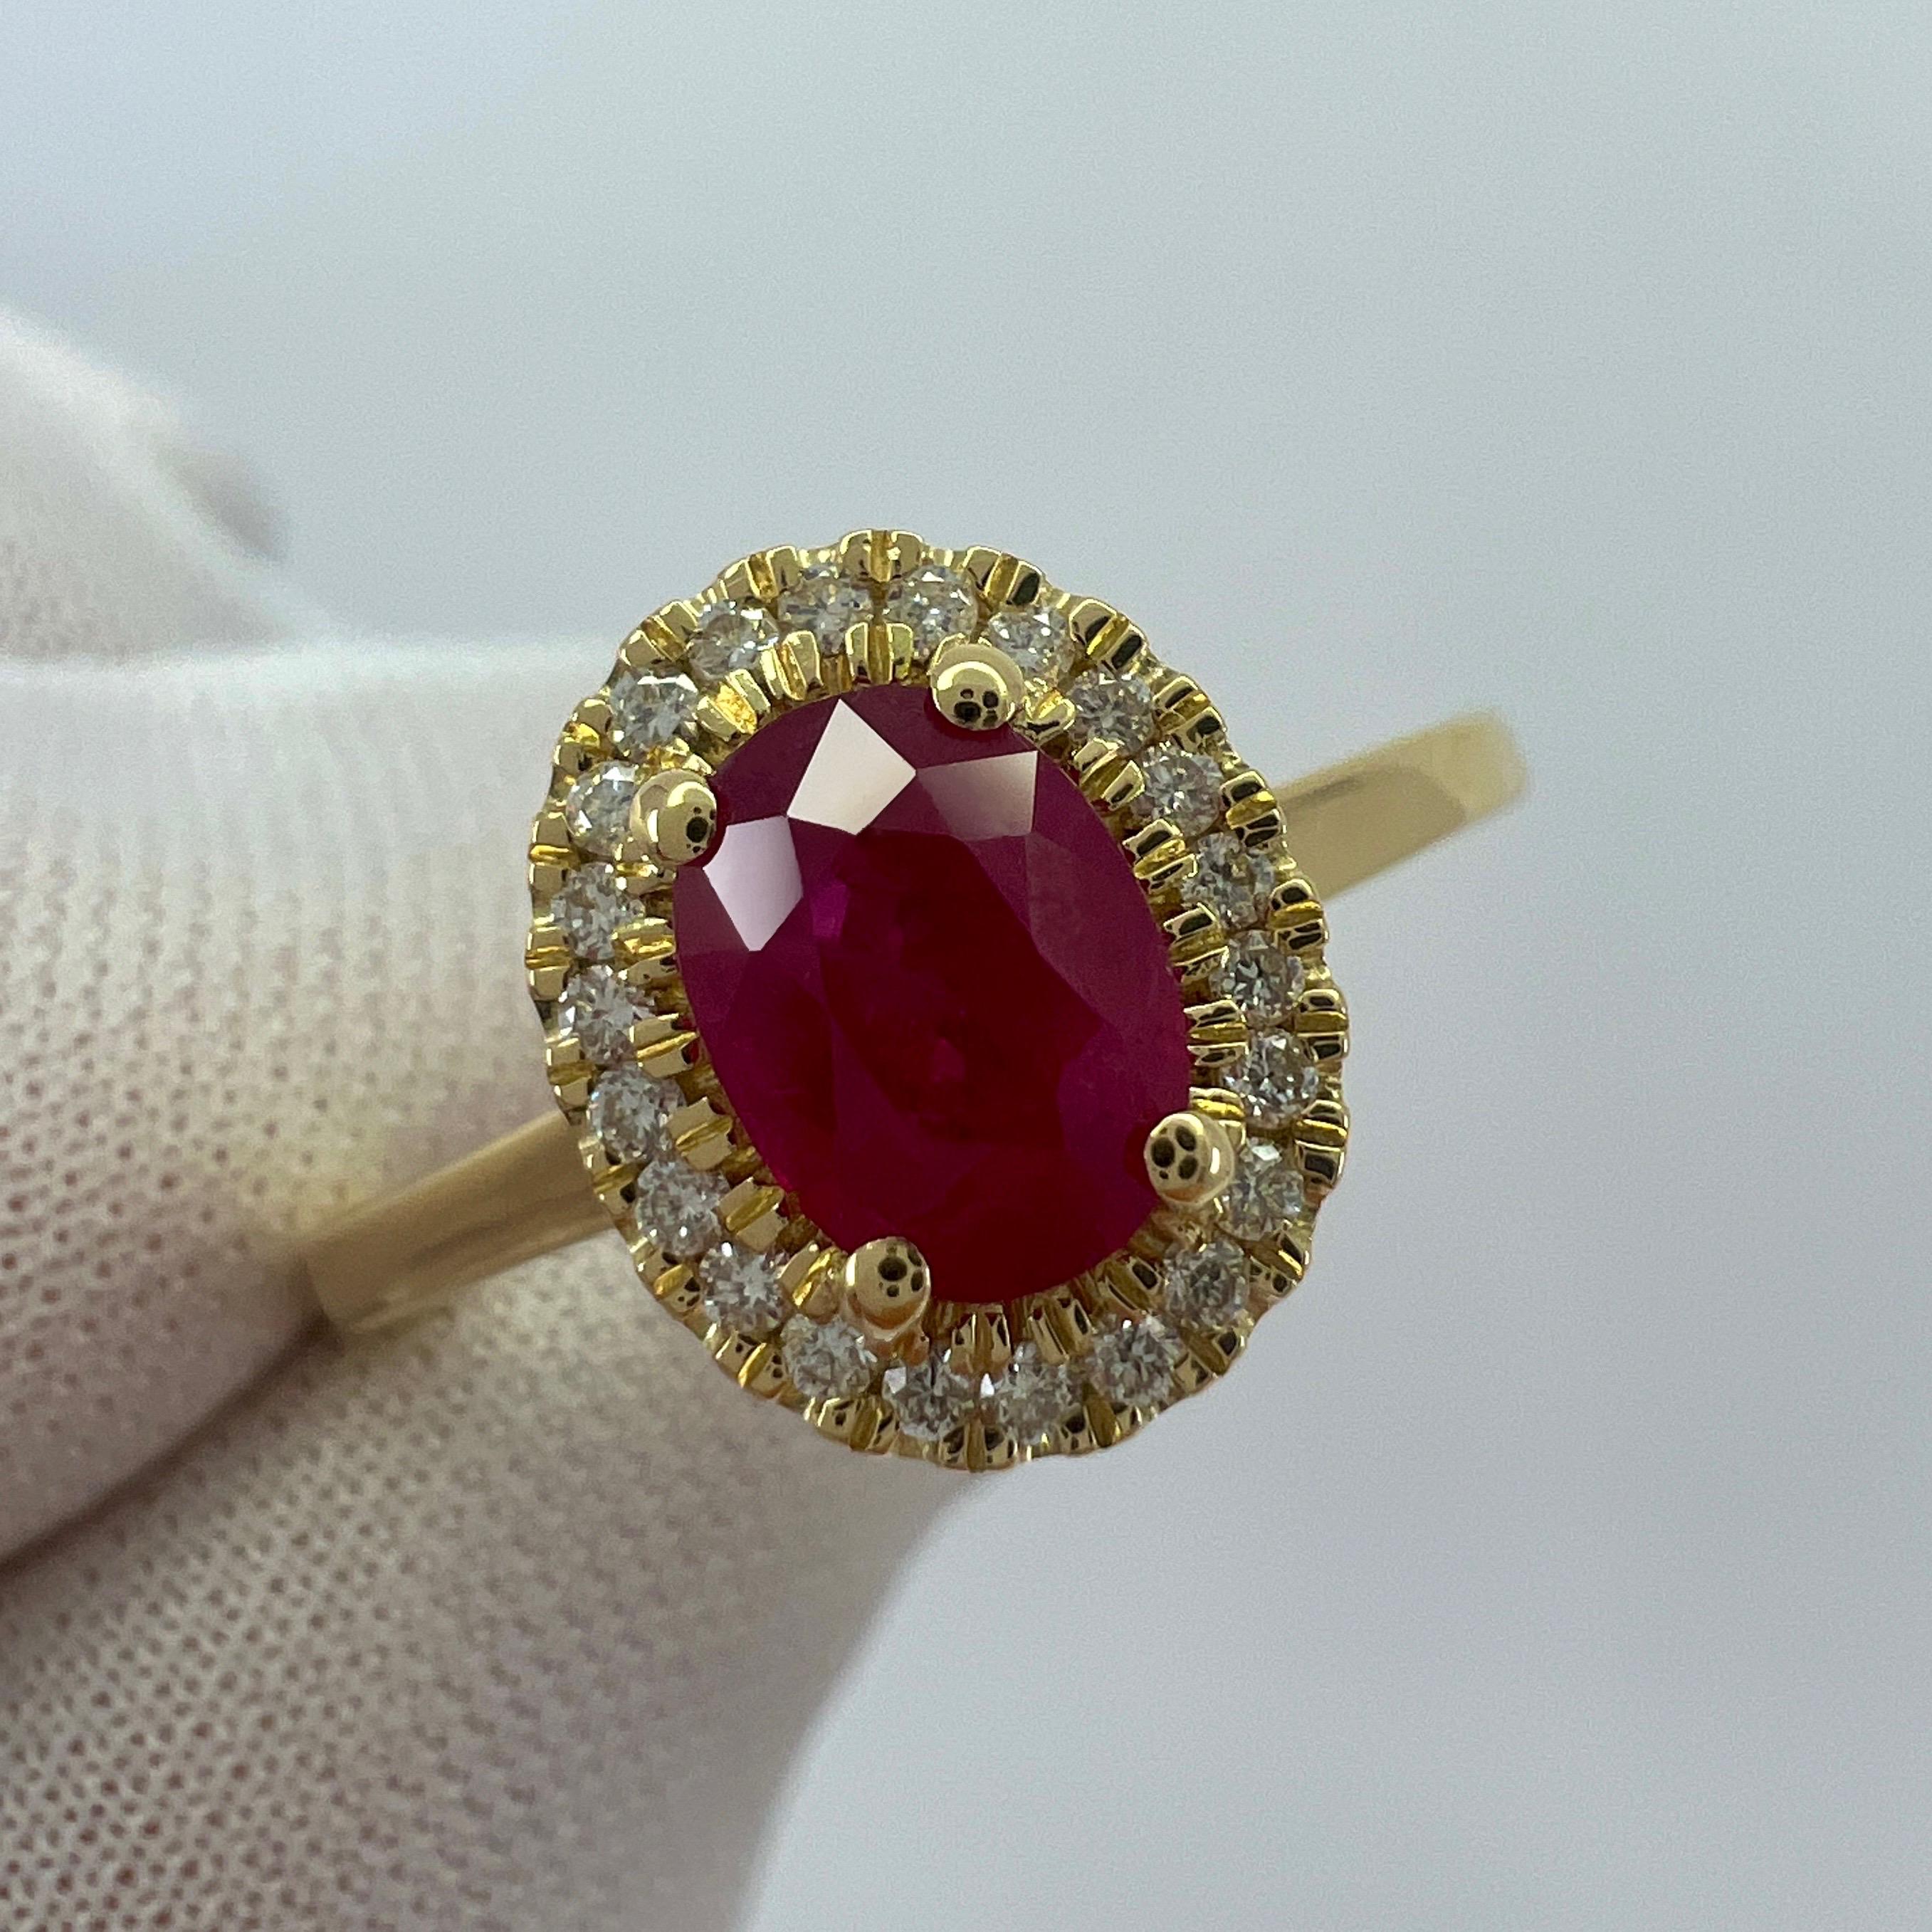 Fine Deep Red Ruby And Diamond 18k Yellow Gold Halo Cluster Ring.

1.06ct deep red oval cut natural ruby set in a finely made 18k yellow gold halo ring. This ruby has a beautiful deep 'cherry' red colour, a very good oval cut and good clarity. Some